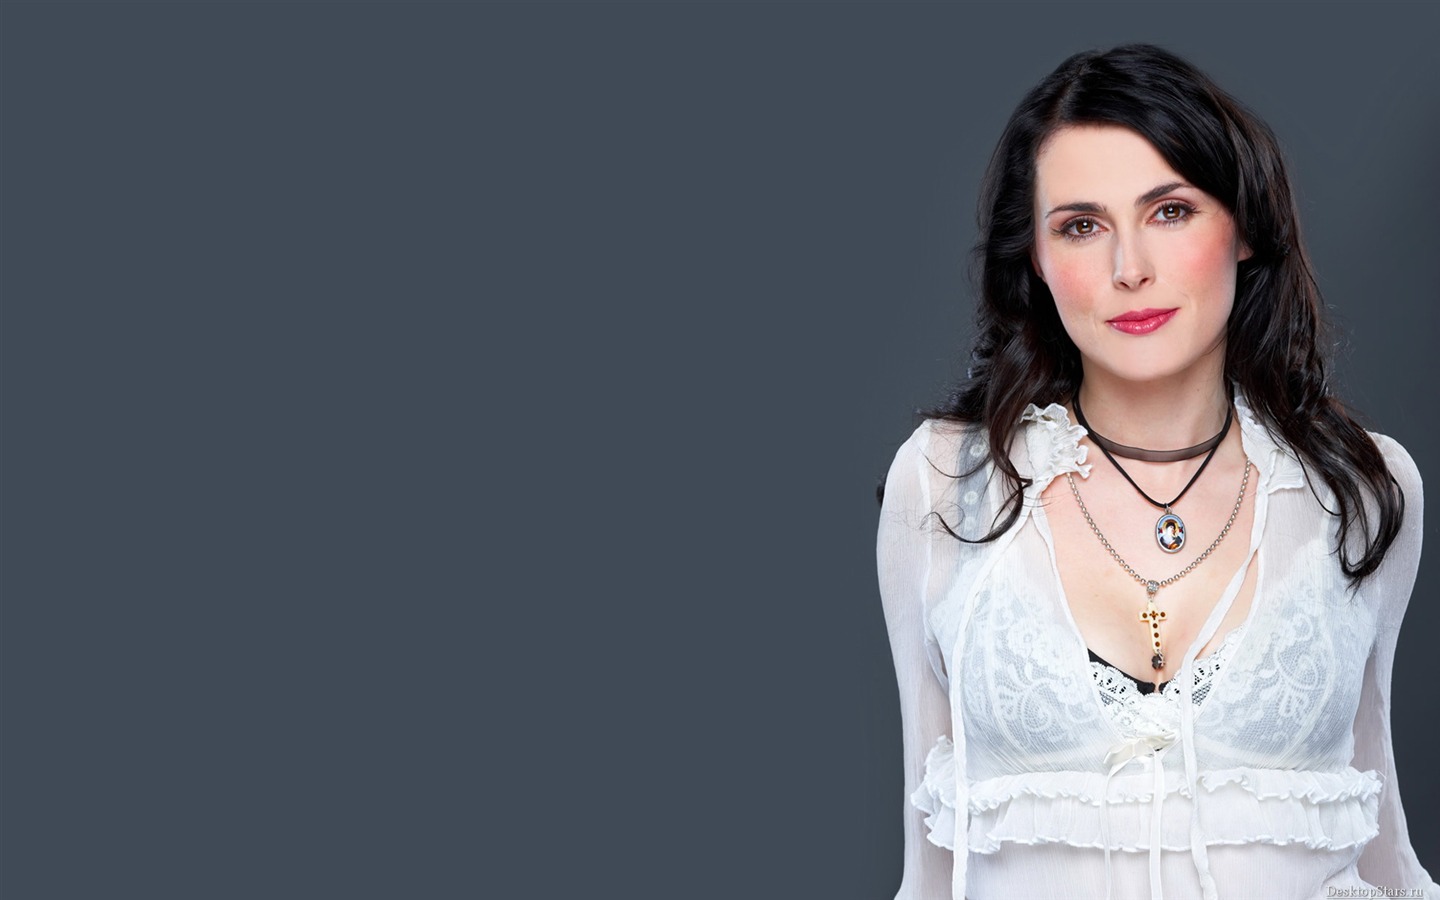 Sharon den Adel #006 - 1440x900 Wallpapers Pictures Photos Images